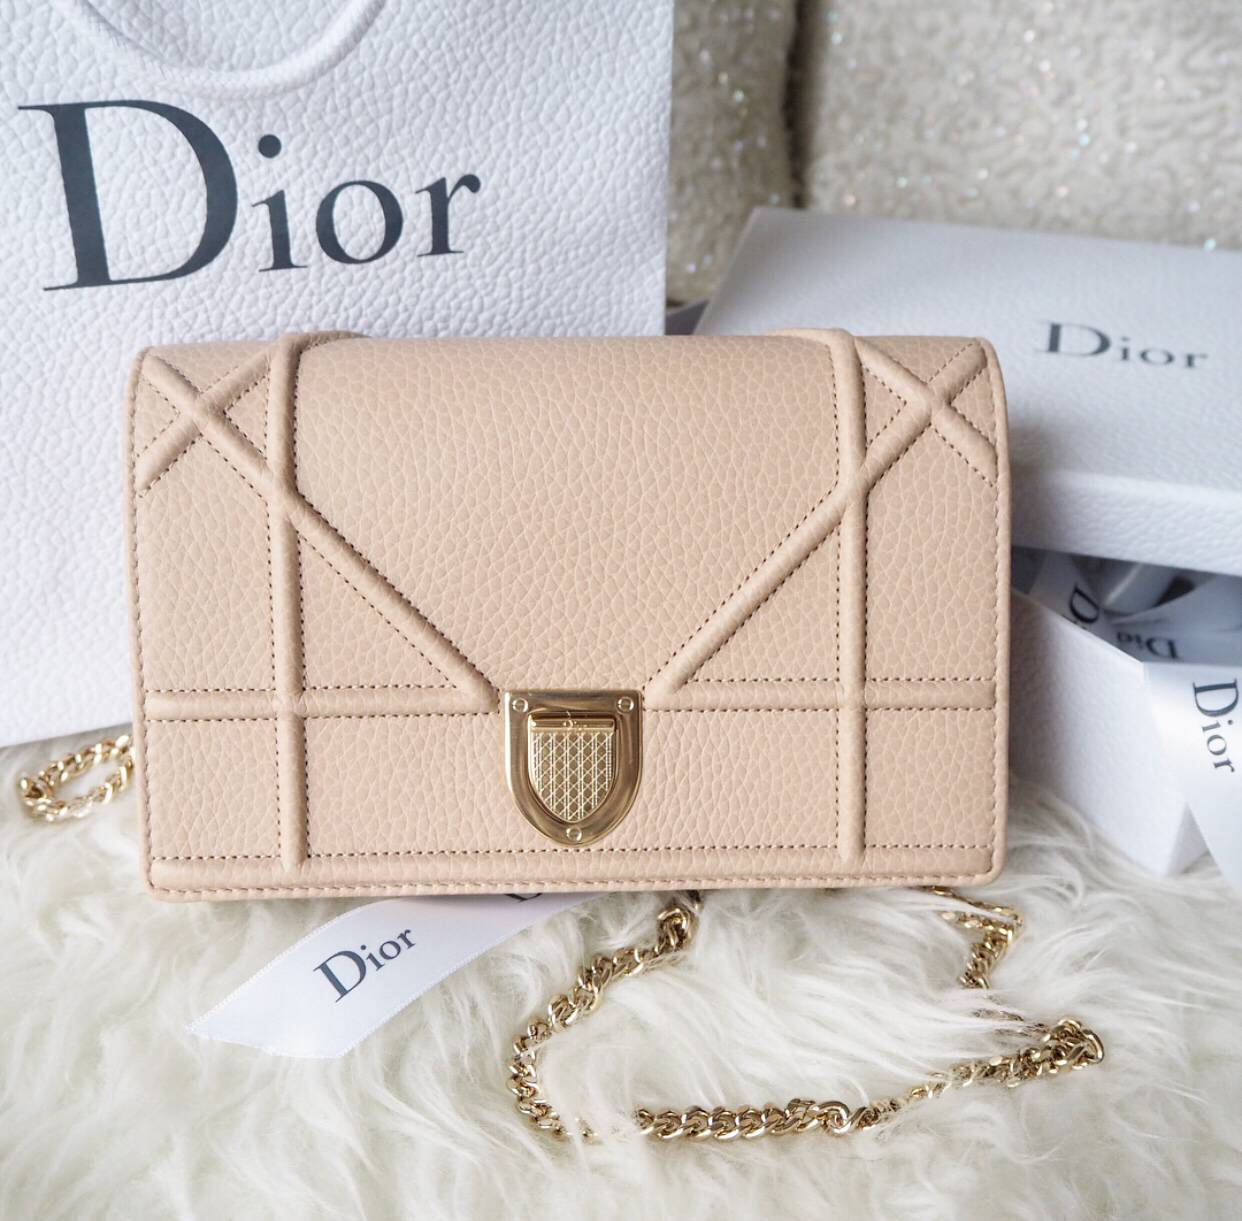 dior woc review